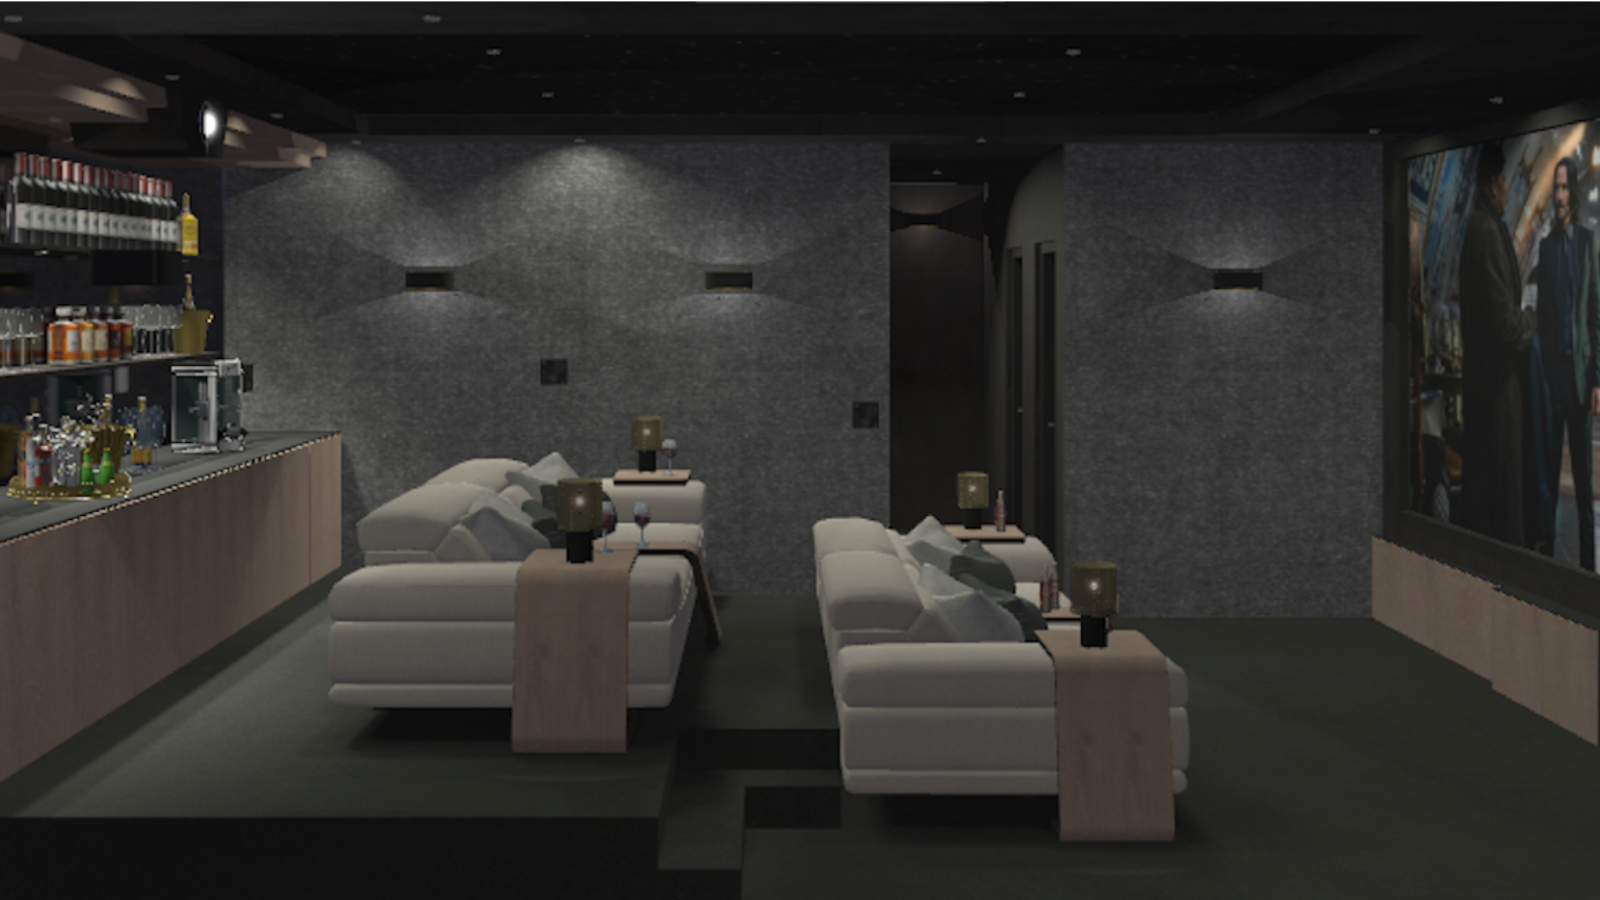 Home cinema render showing layered cinema seating side view